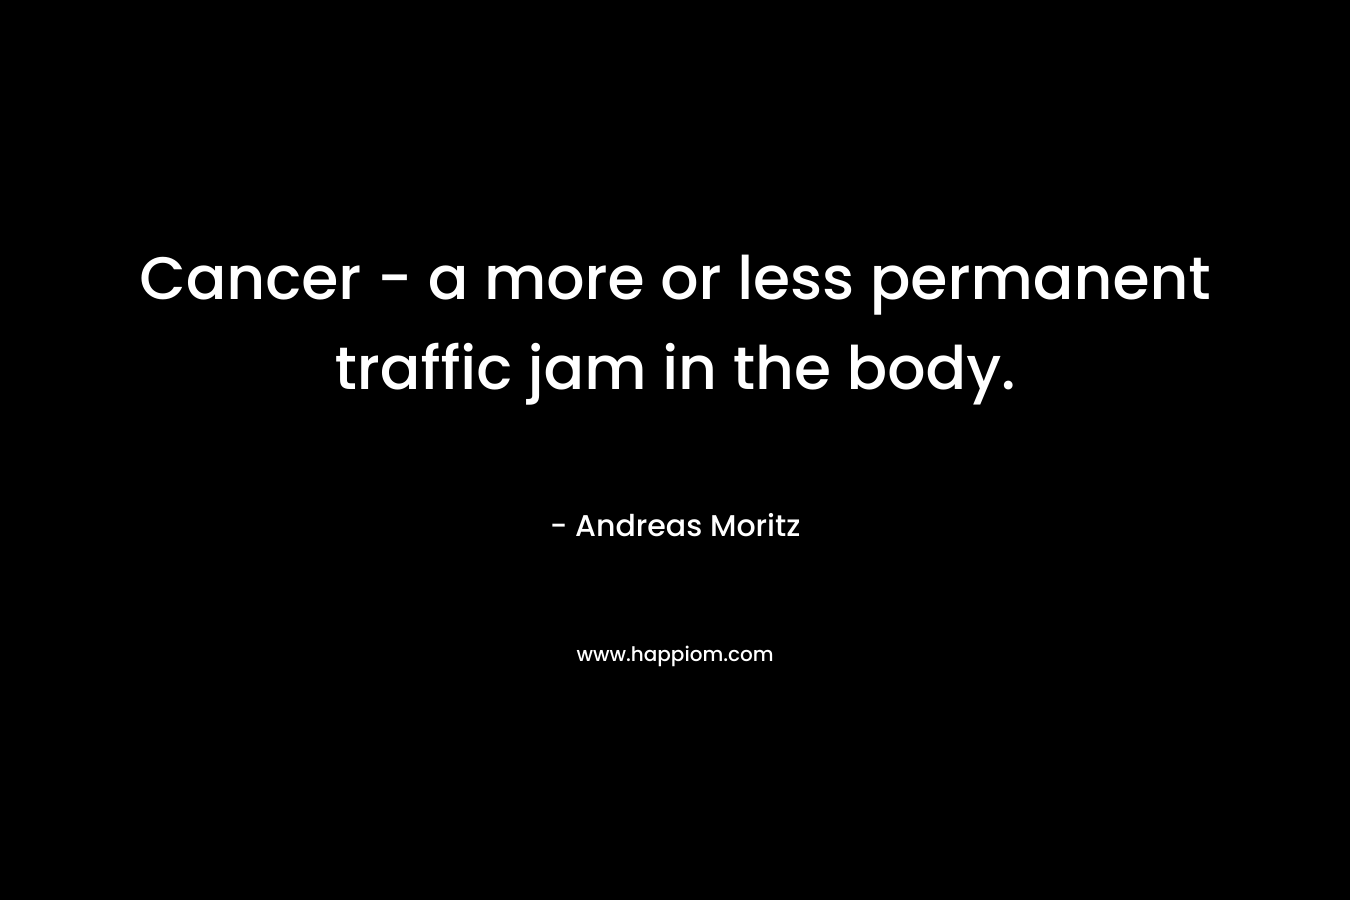 Cancer - a more or less permanent traffic jam in the body.